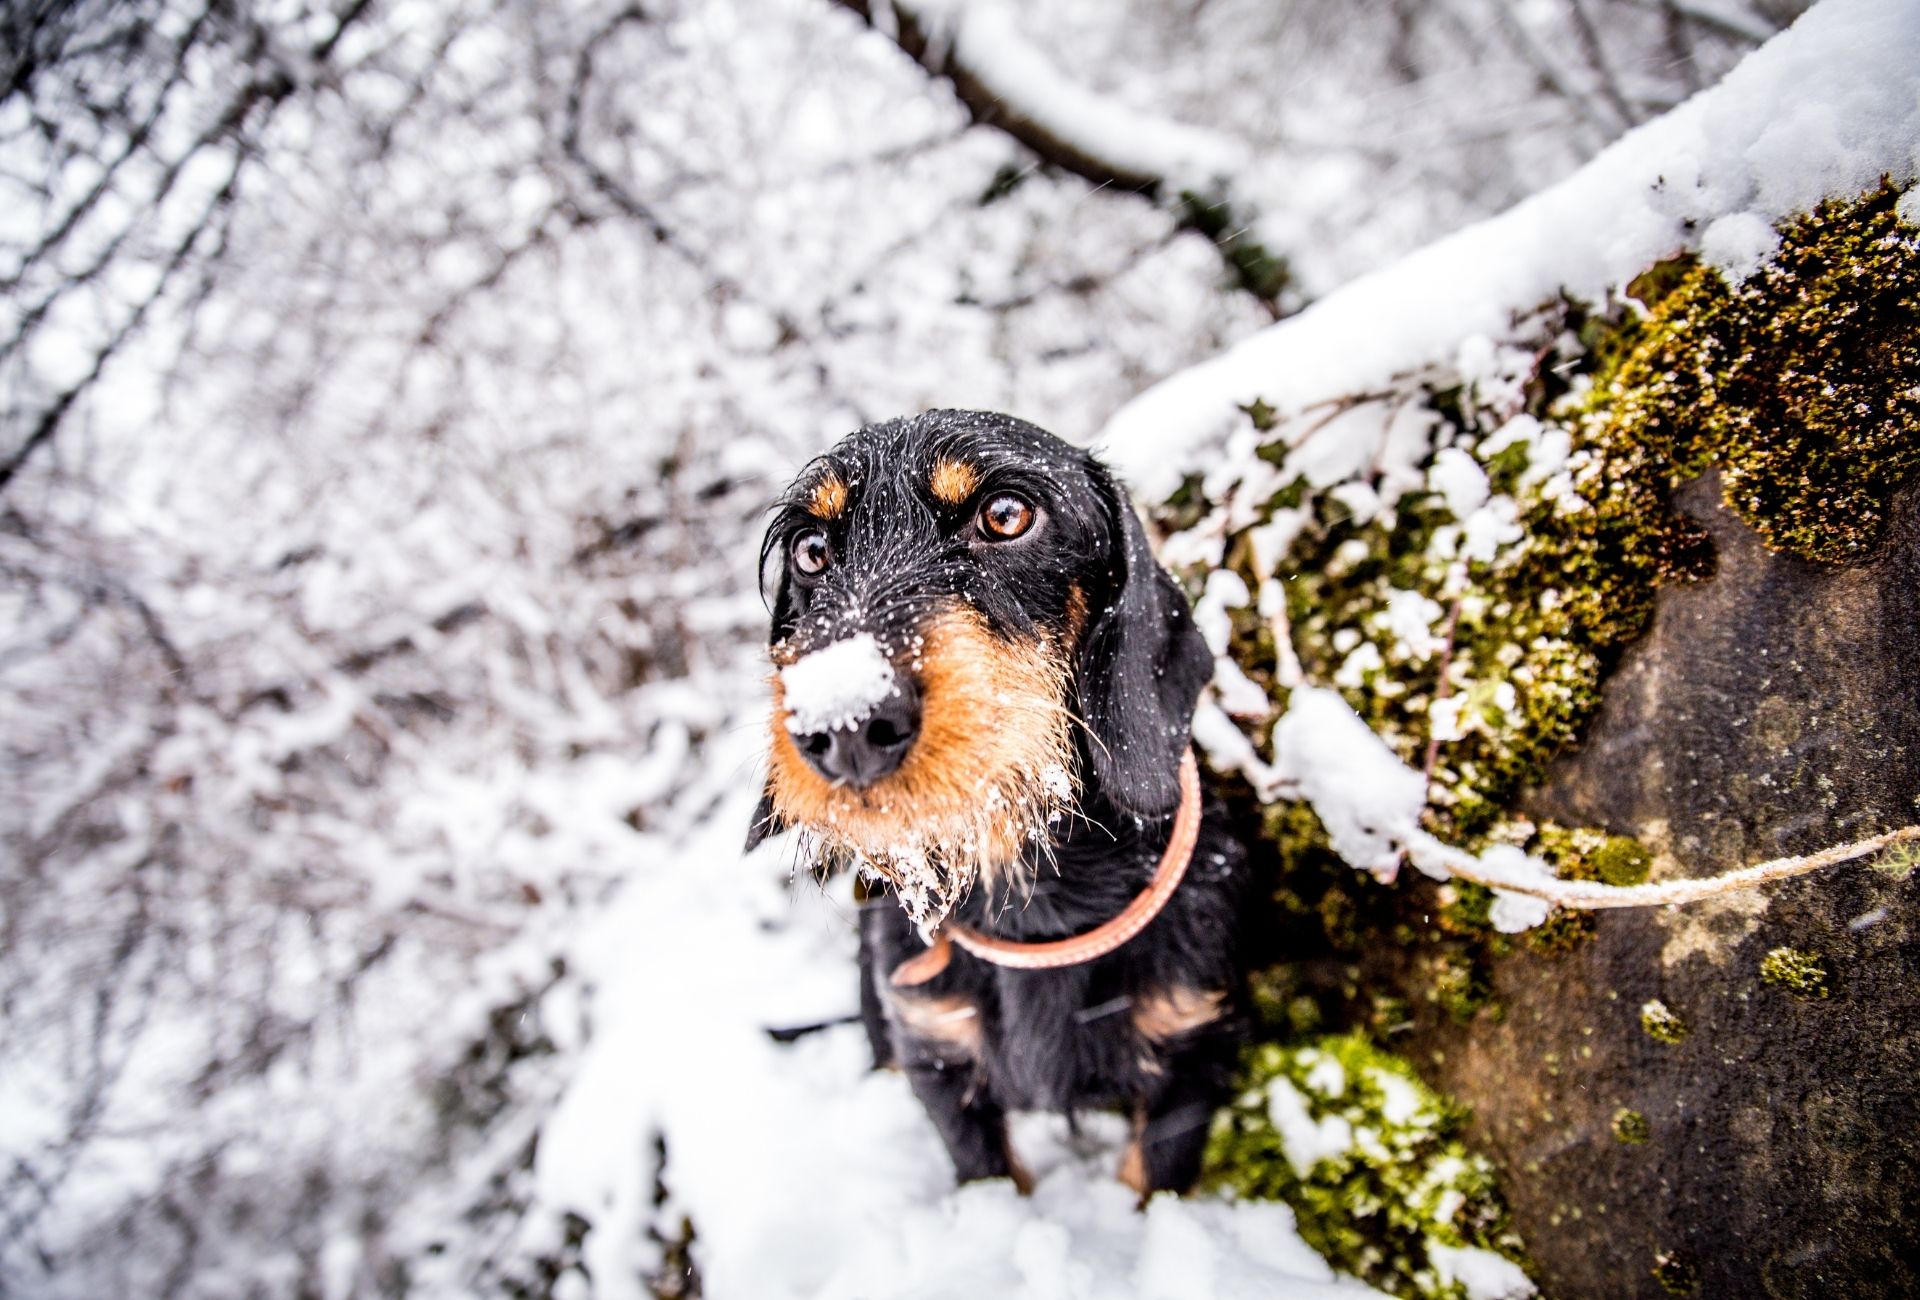 Dachshund in snow covered forest